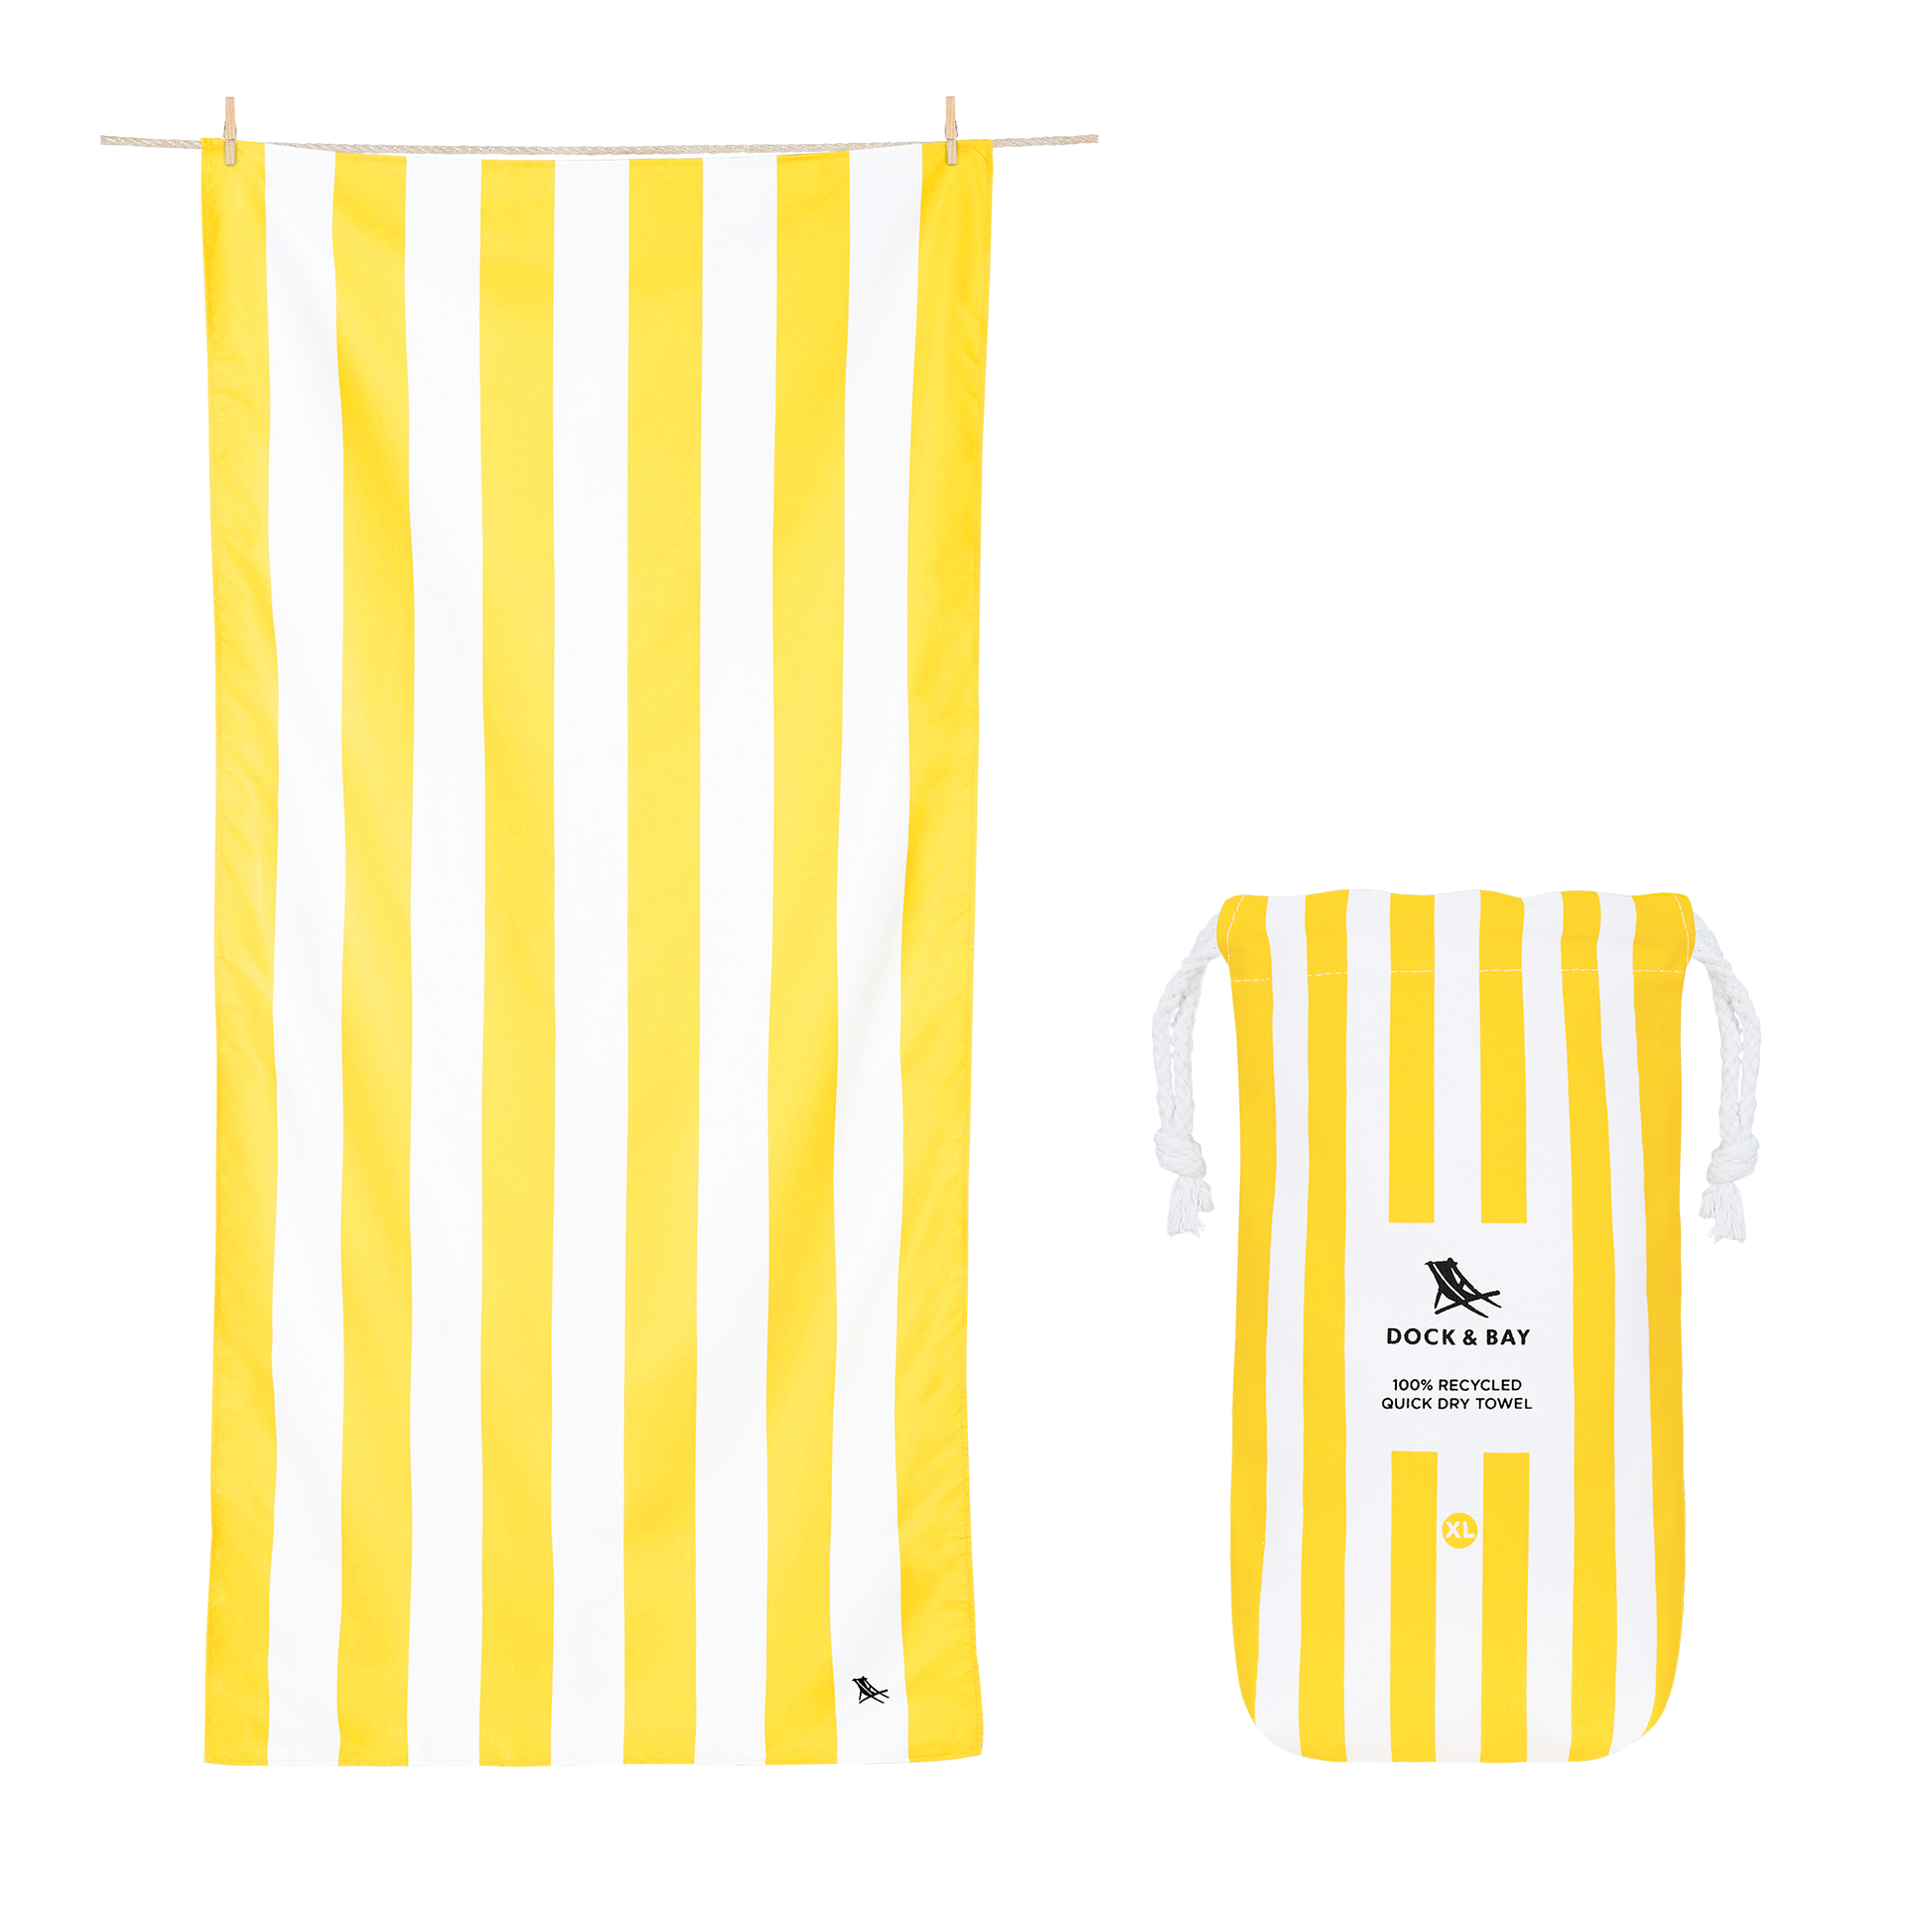 Boracay Yellow Quick Dry XL Beach Towel by Dock and Bay